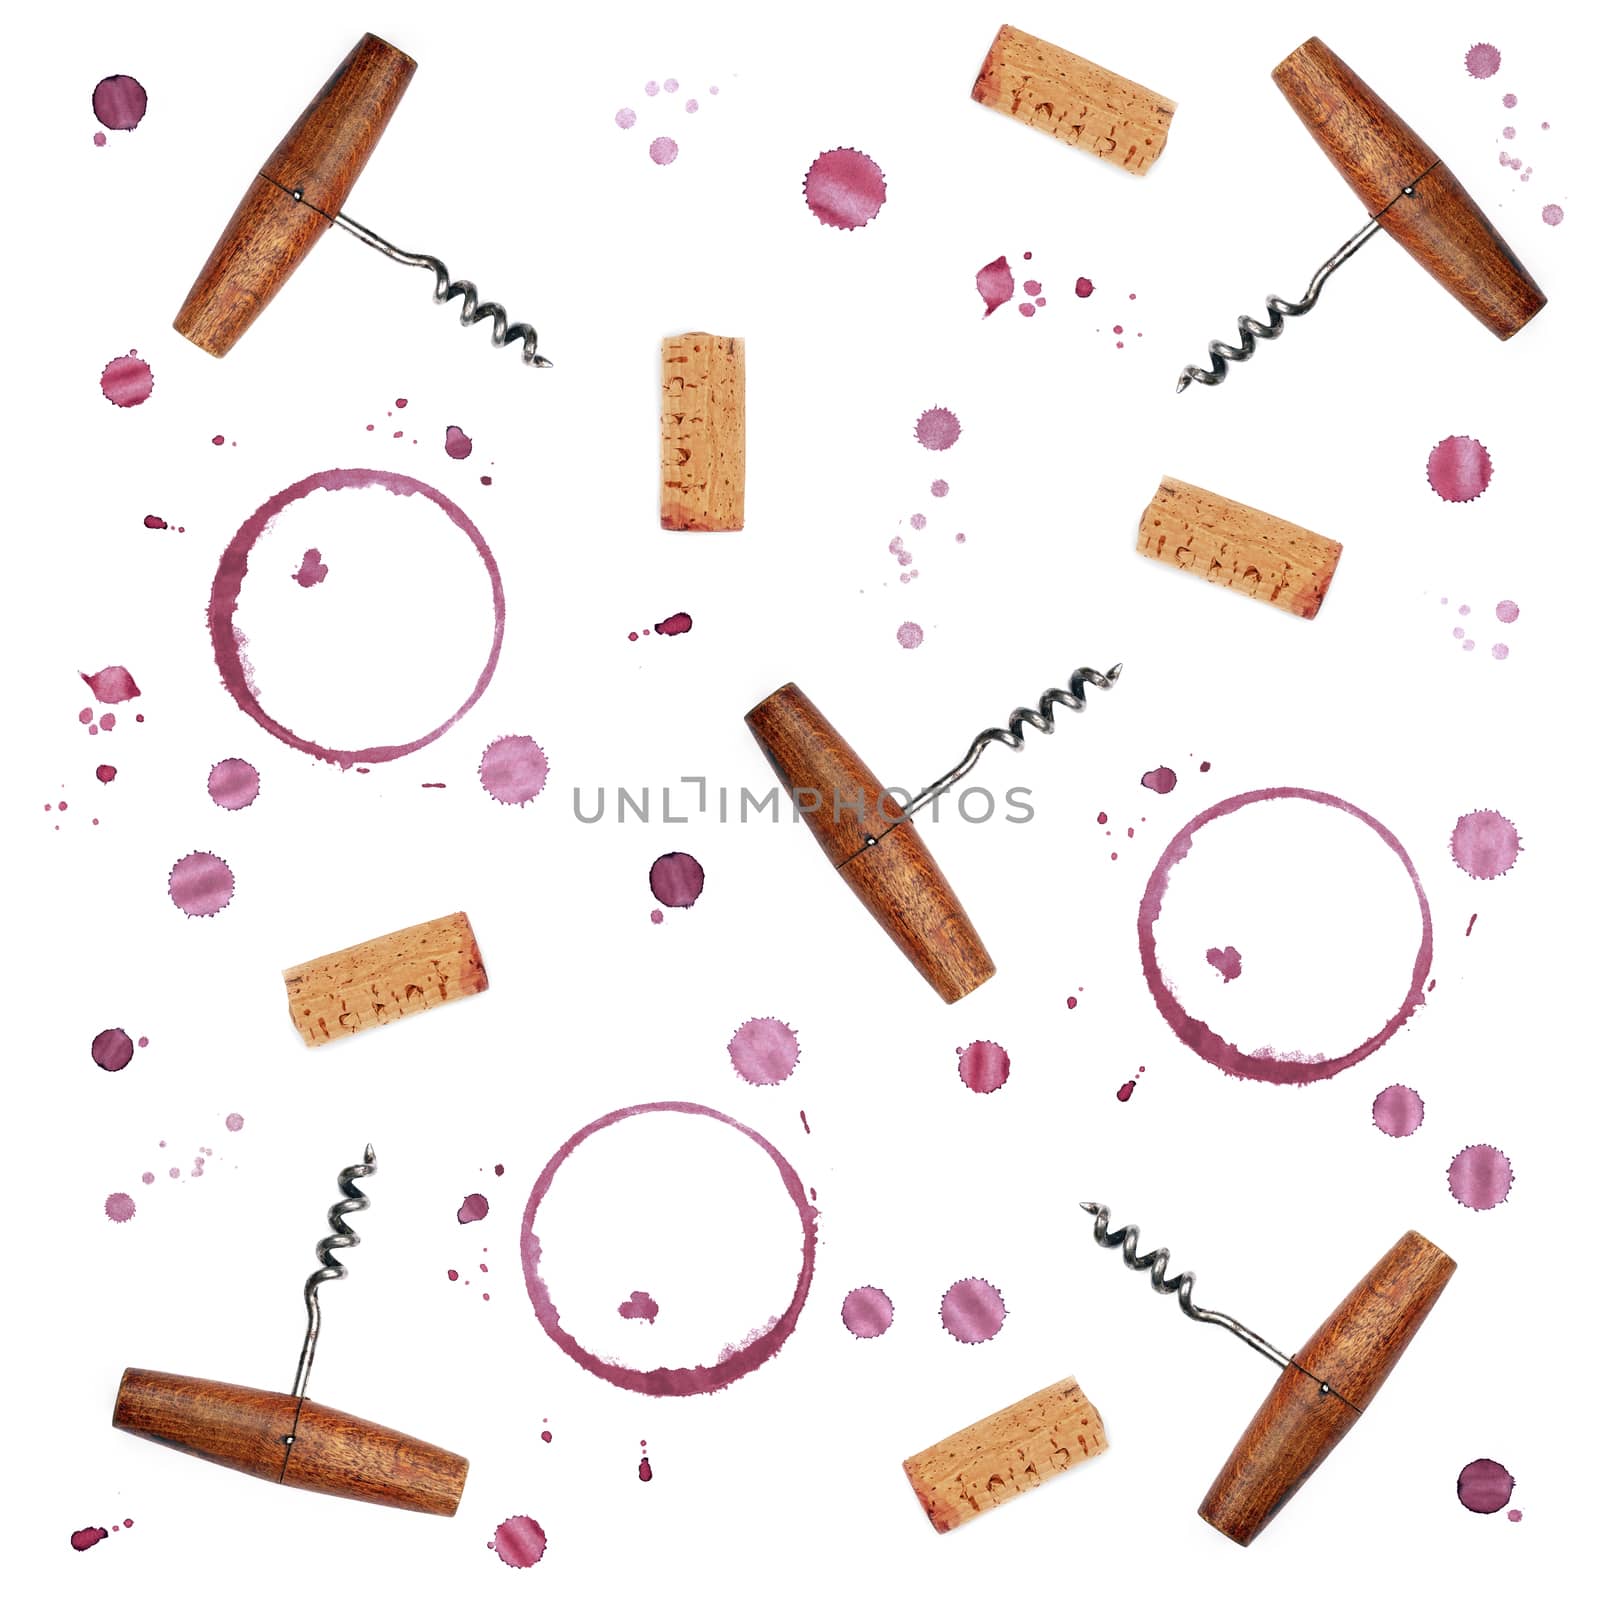 Pattern of red wine ring stains, drops, corks and bottle openers isolated on white background